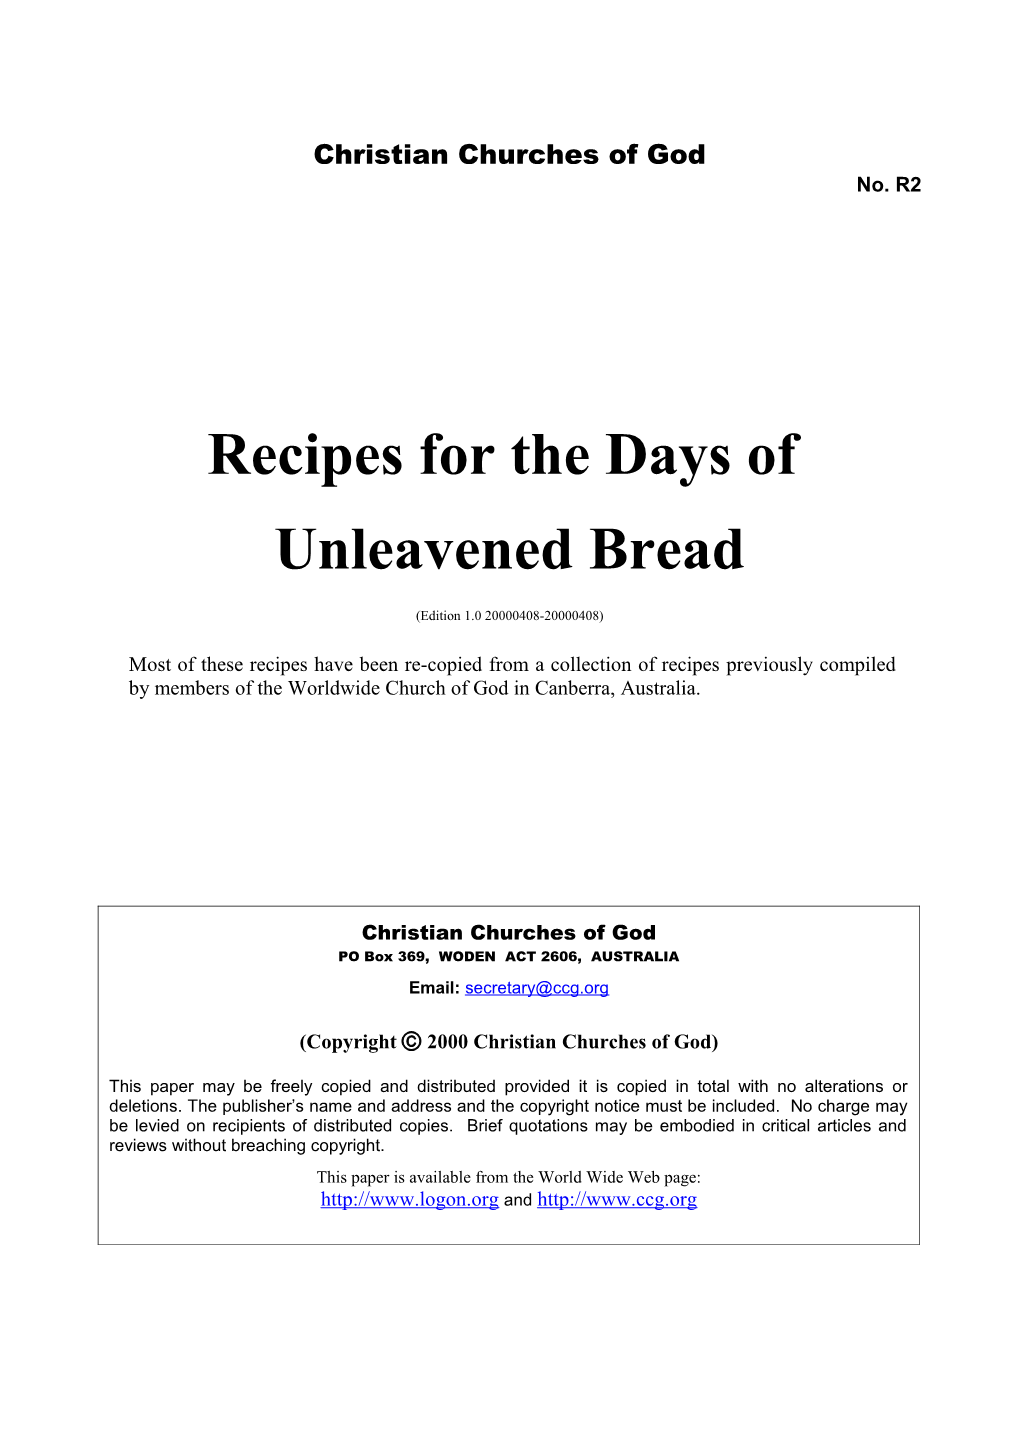 Recipes for the Days of Unleavened Bread (No. R2)